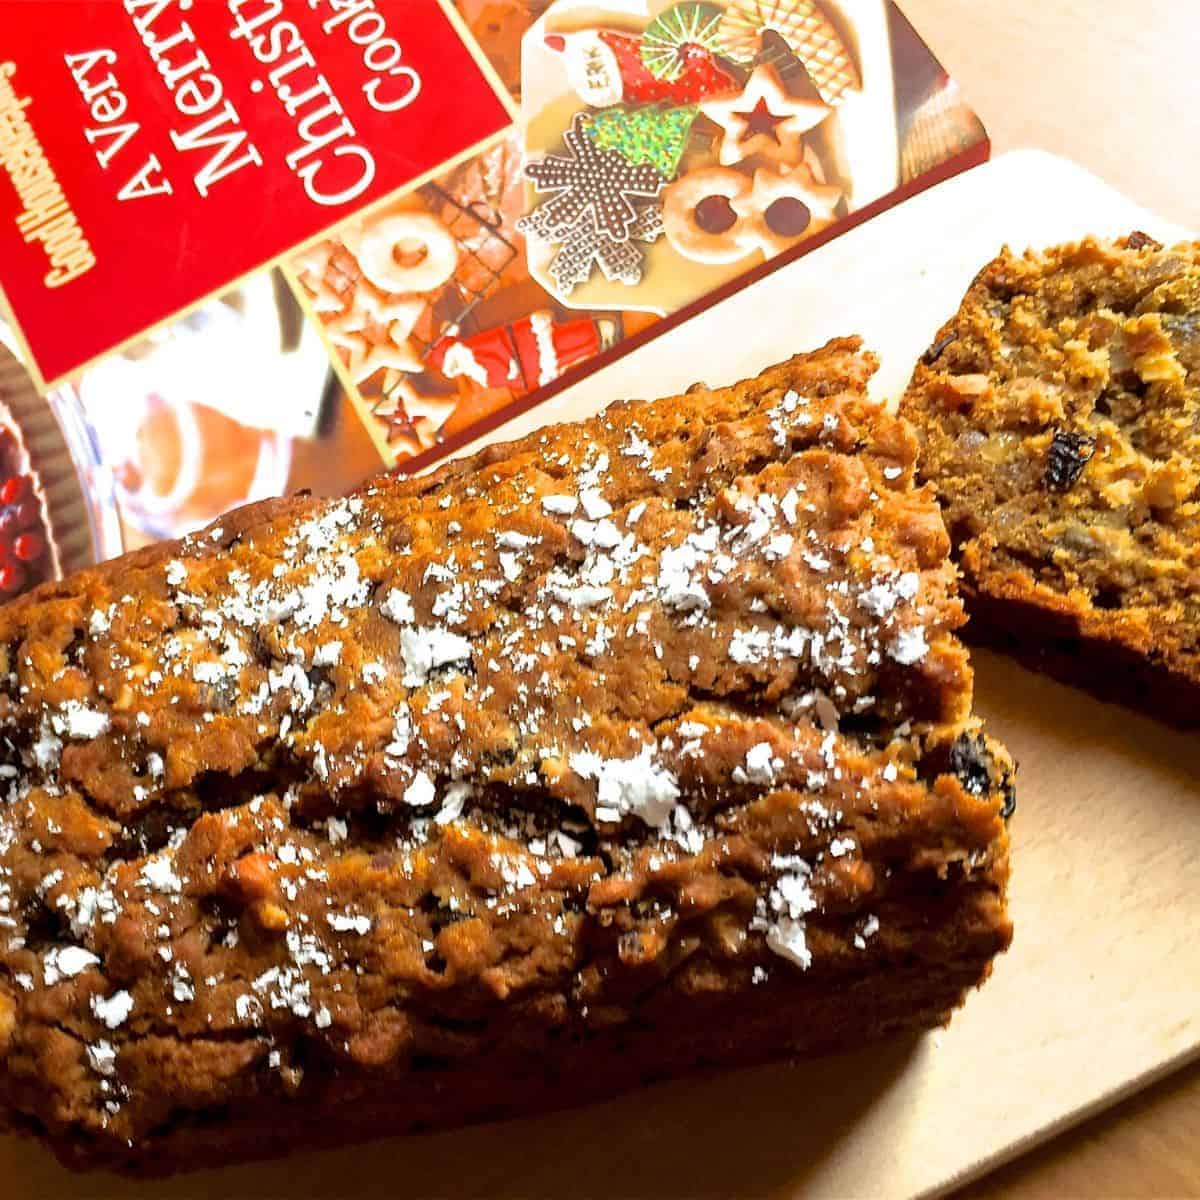 Dark Brown coloured Eggless Christmas Cake with icing sugar strewn on top. A slice of cake lying on a wooden board, to the right and a red white and green book on Christmas cookies in the background